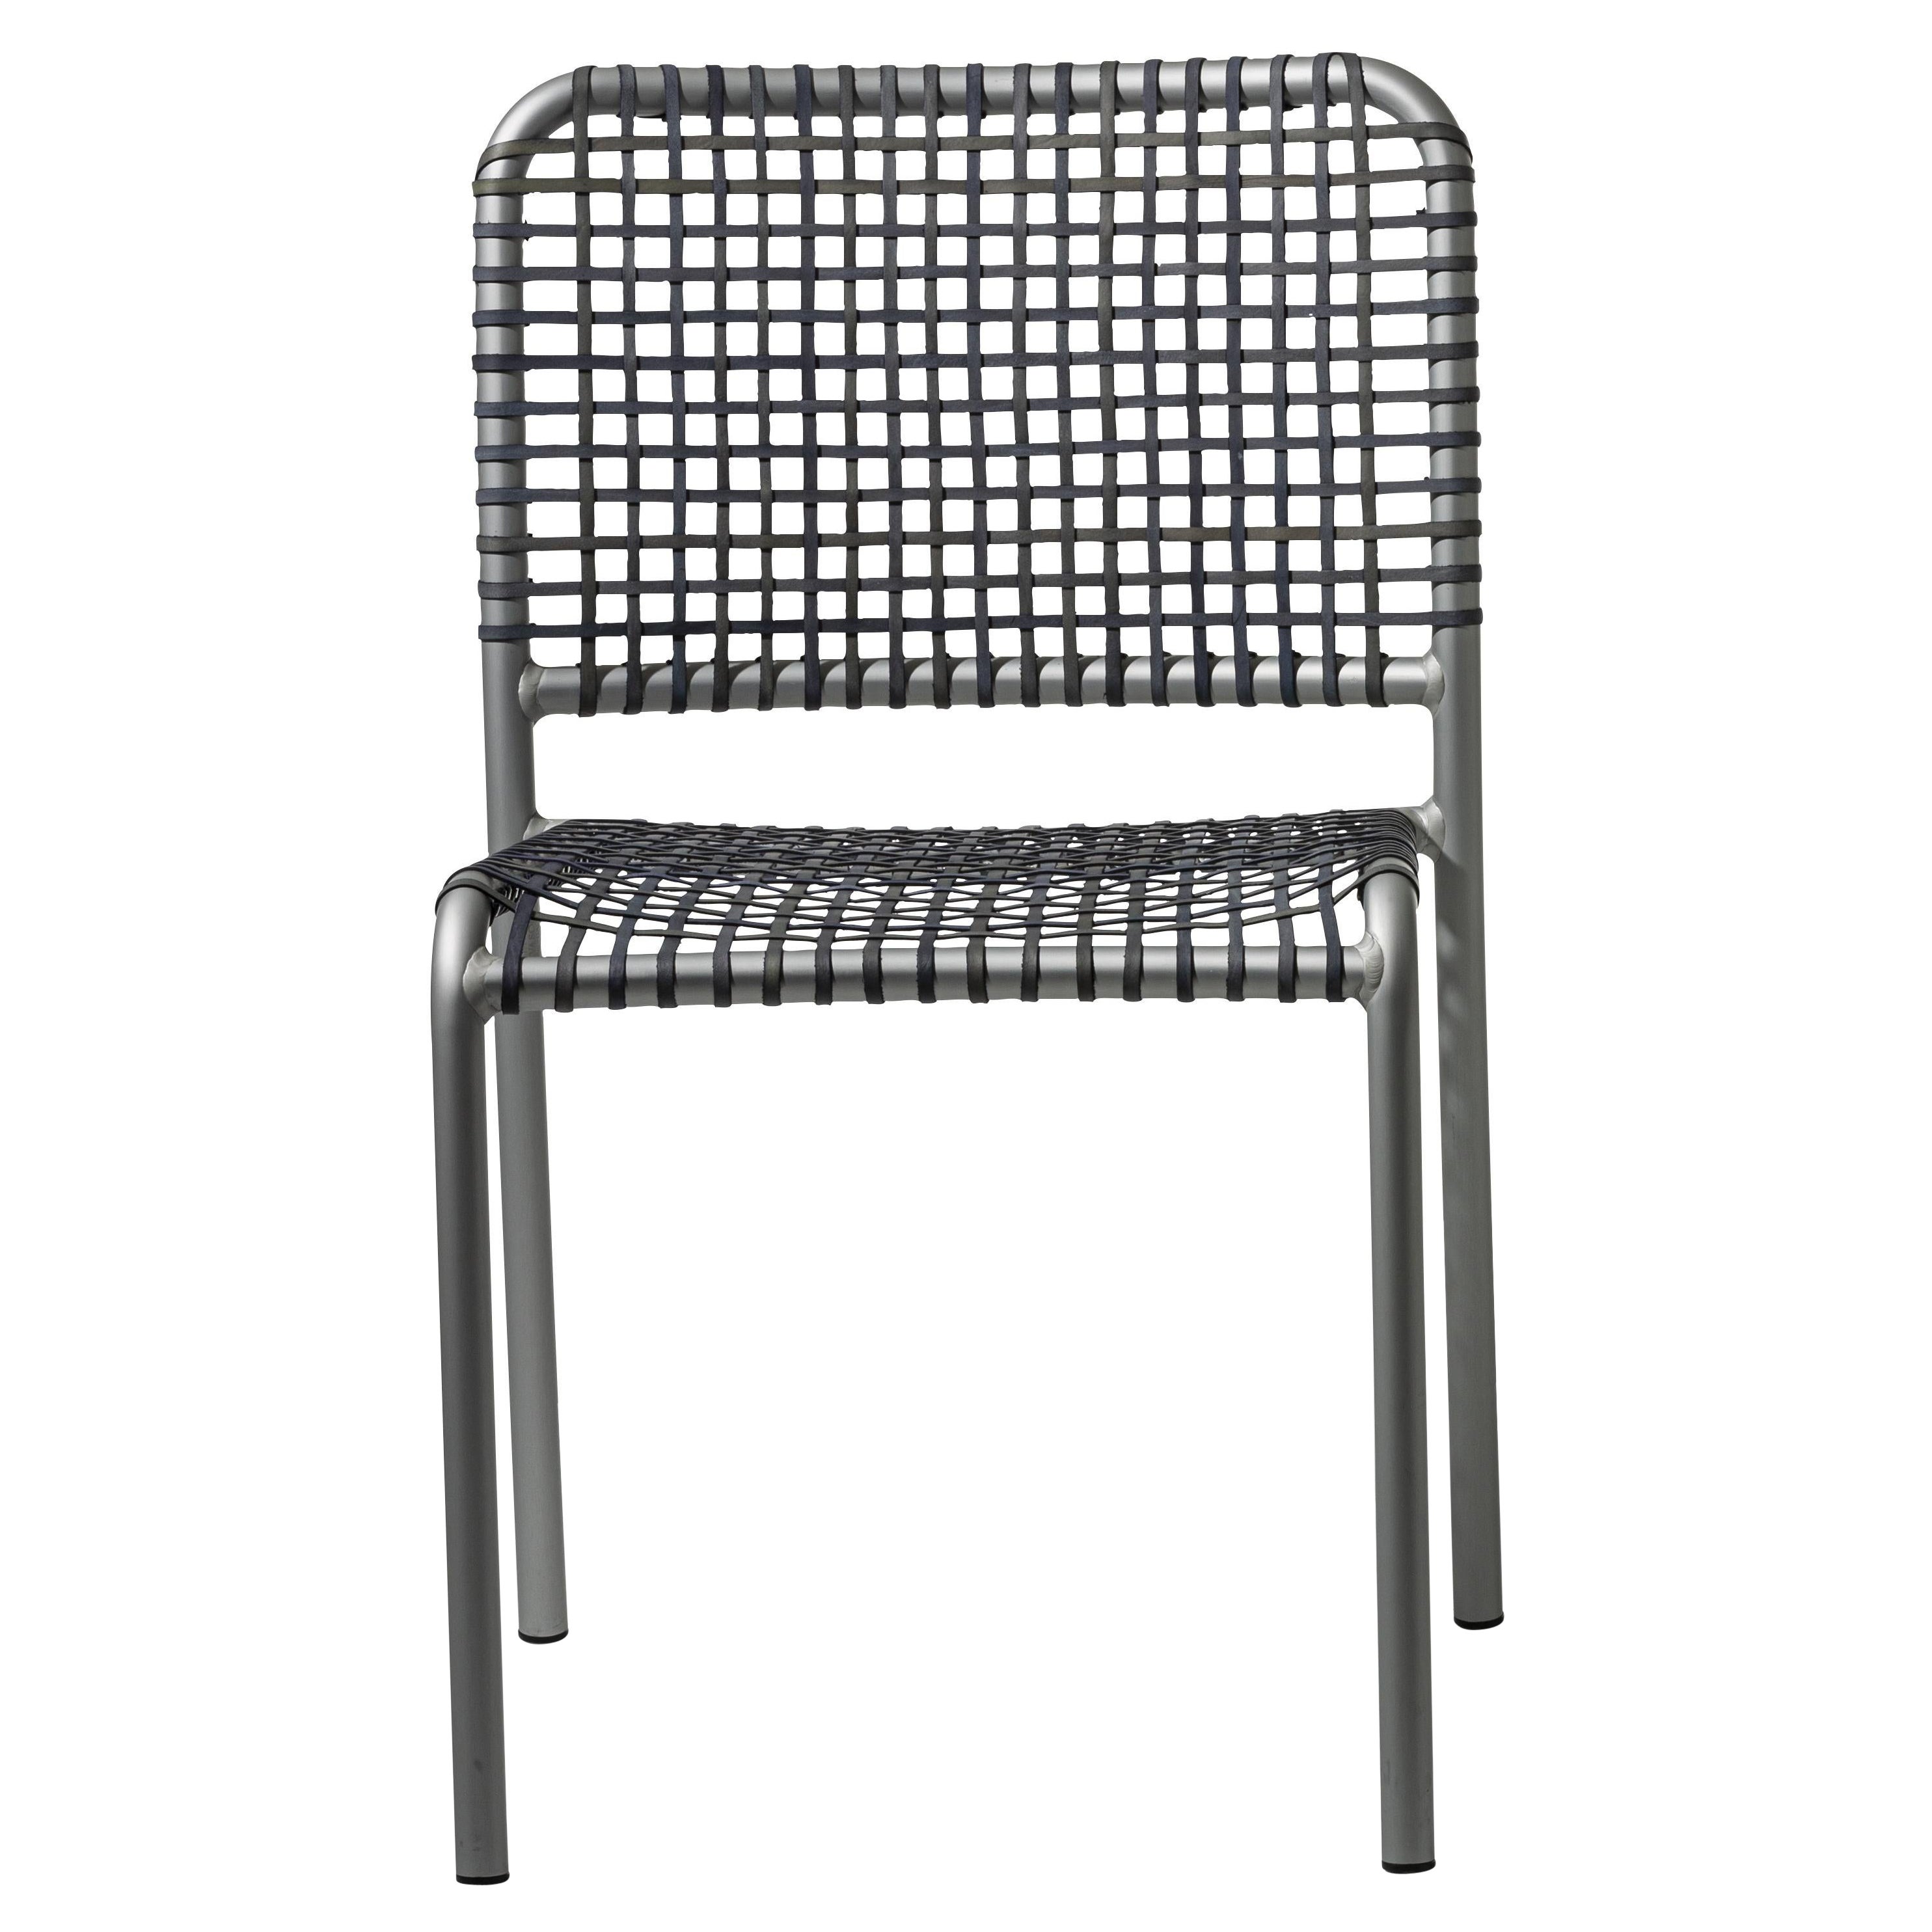 Gervasoni Allu 223 I Chair in Aluminium Frame and Woven with Grey Rawhide